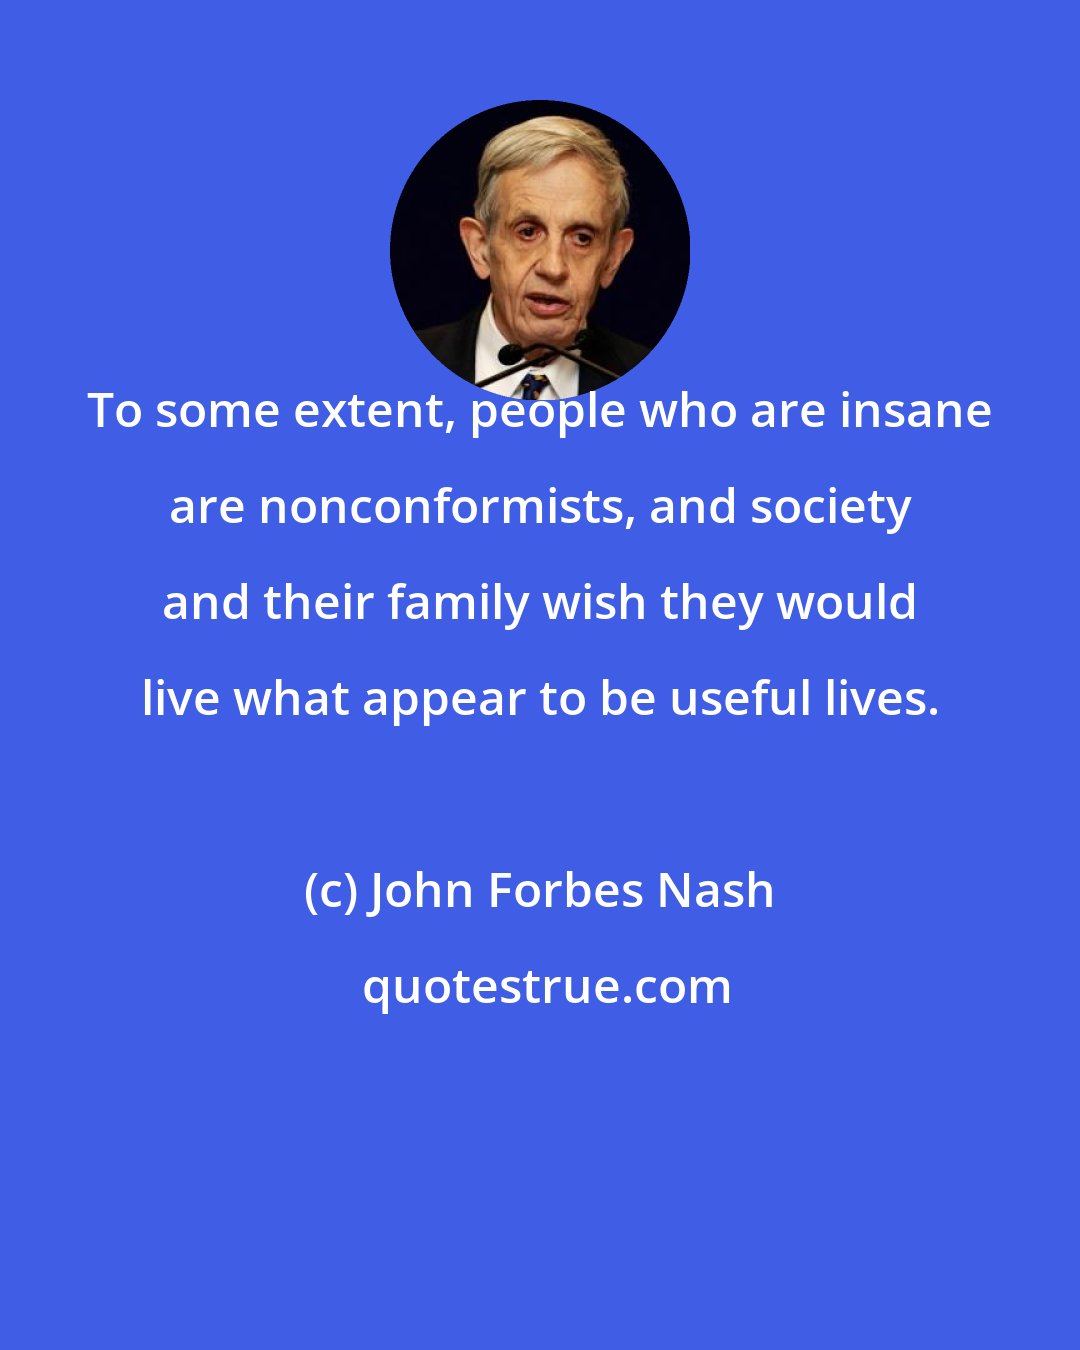 John Forbes Nash: To some extent, people who are insane are nonconformists, and society and their family wish they would live what appear to be useful lives.